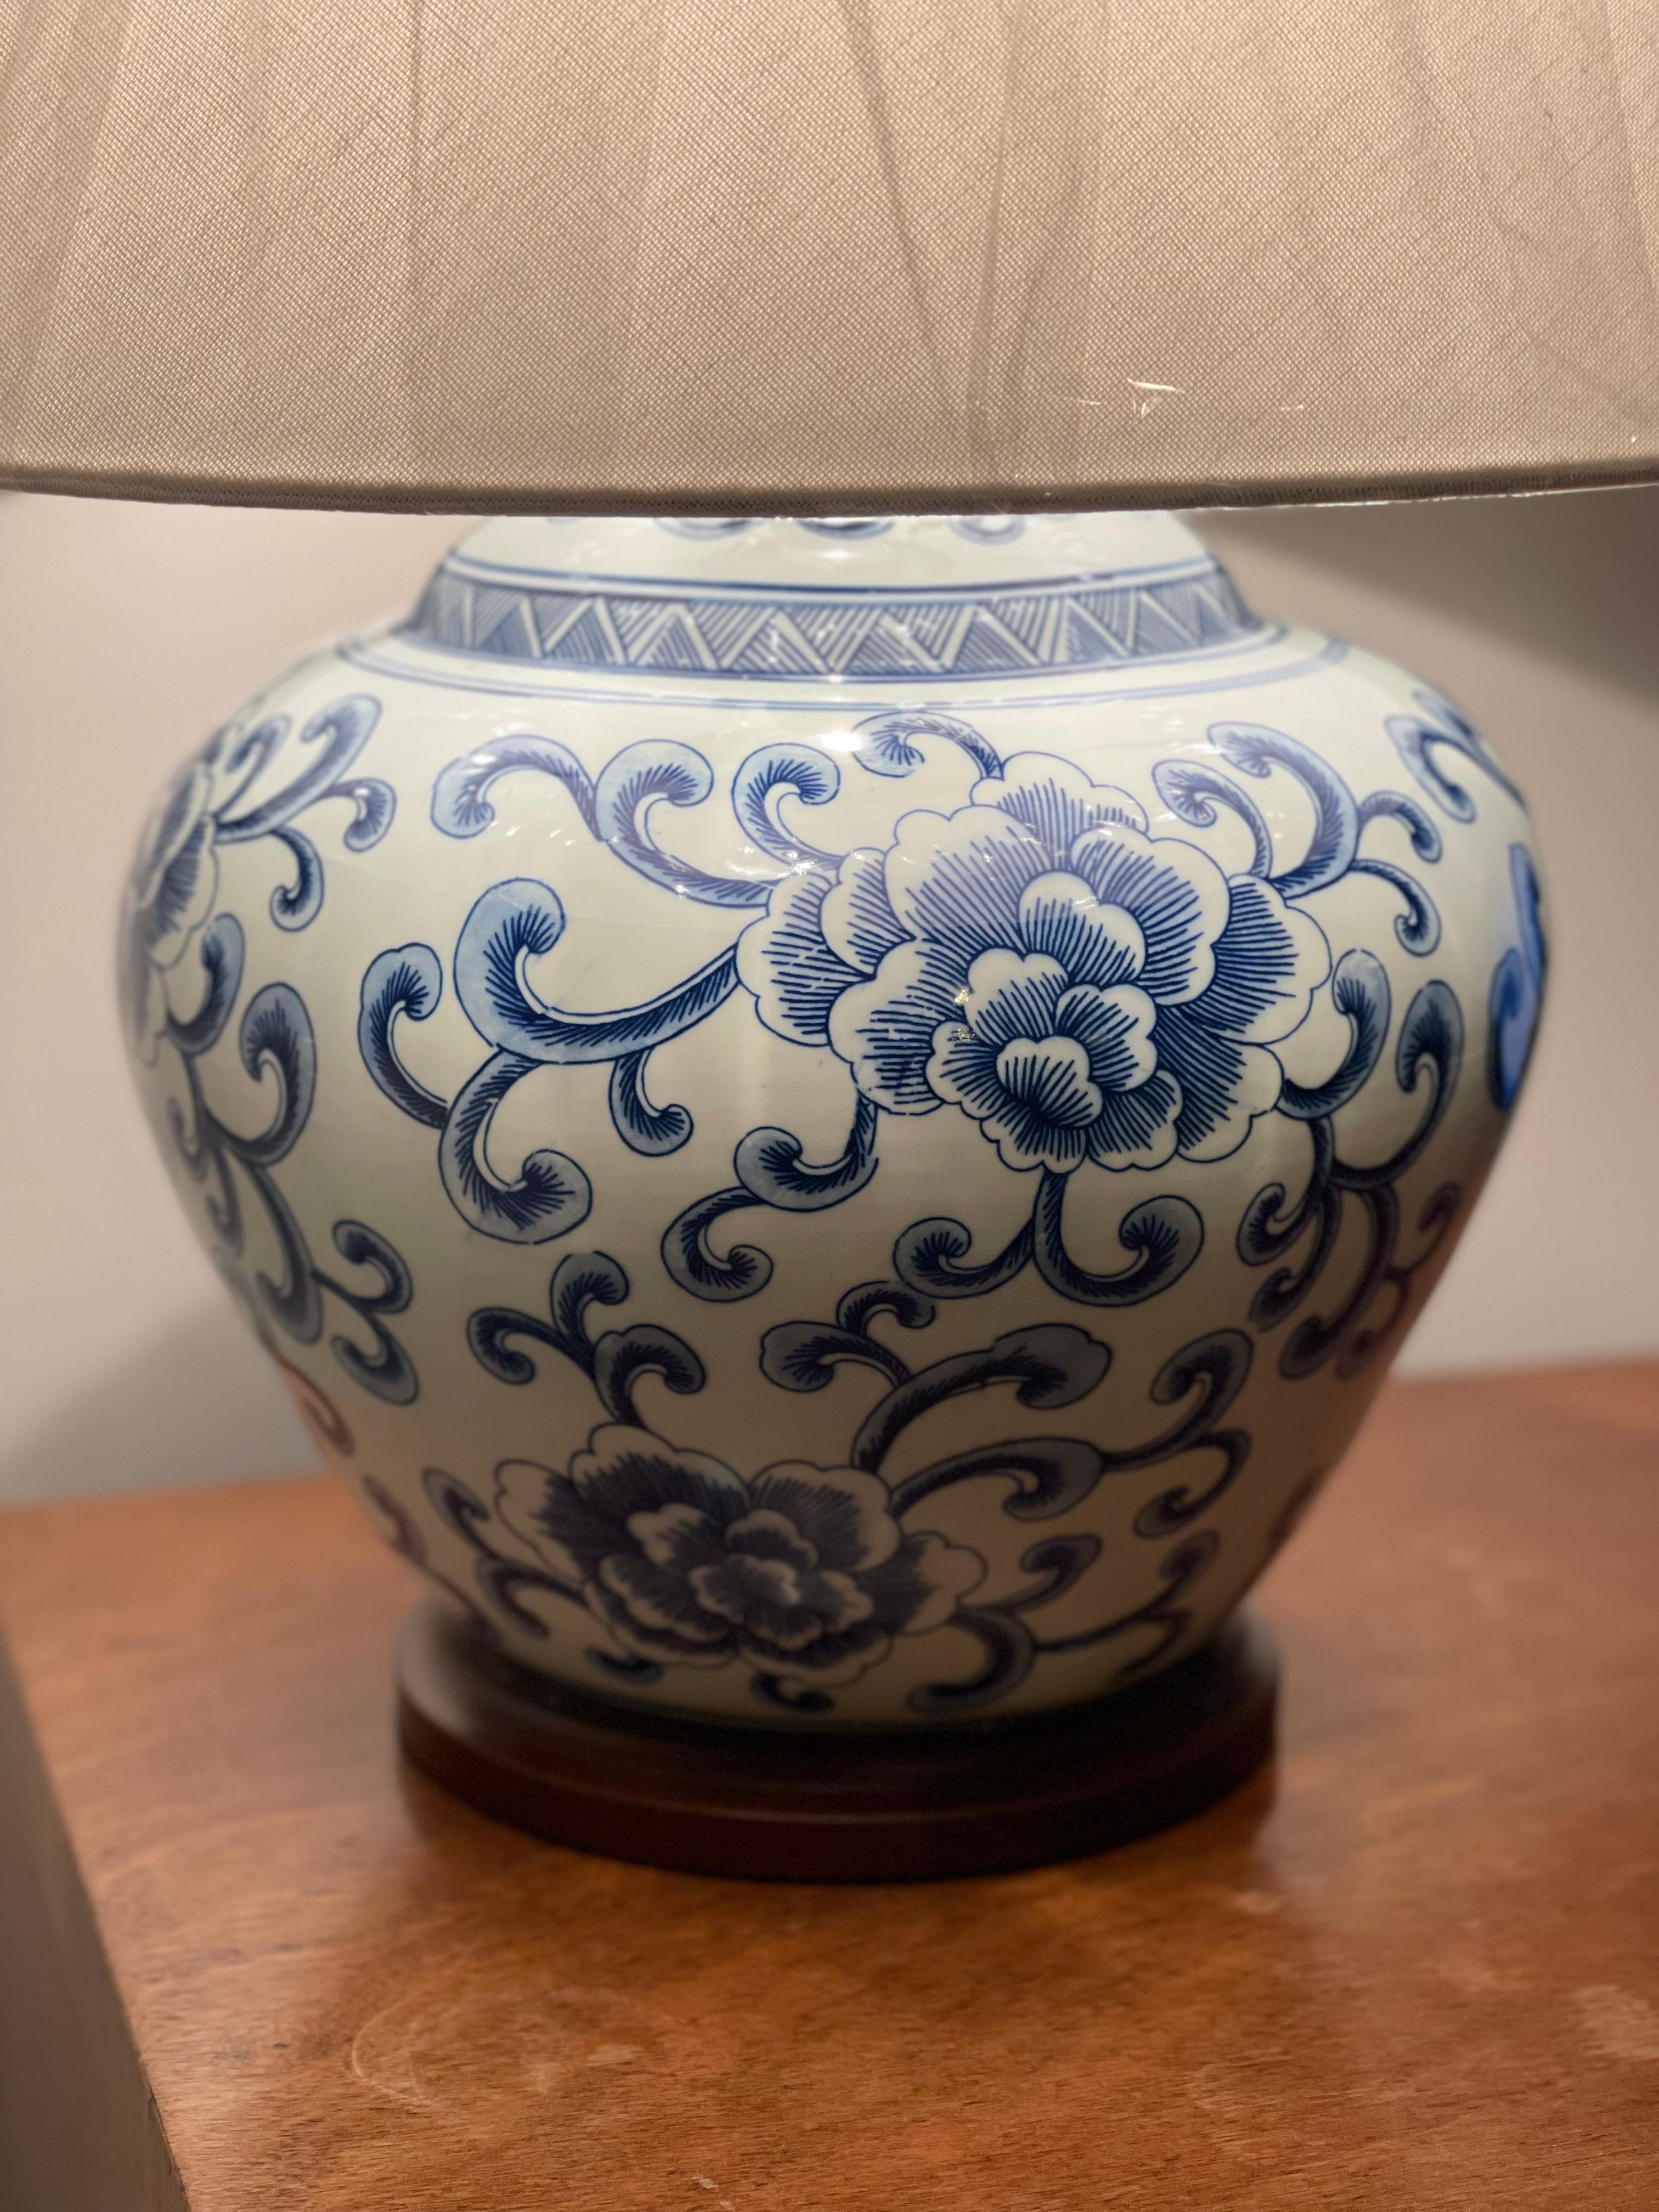 We are delighted to offer for sale this stunning brand new Ralph Lauren Chinese blue porcelain lamps with original shade.

They have the Lauren brass plate around the base and have height adjustable shades and inline cable switches 

Please note